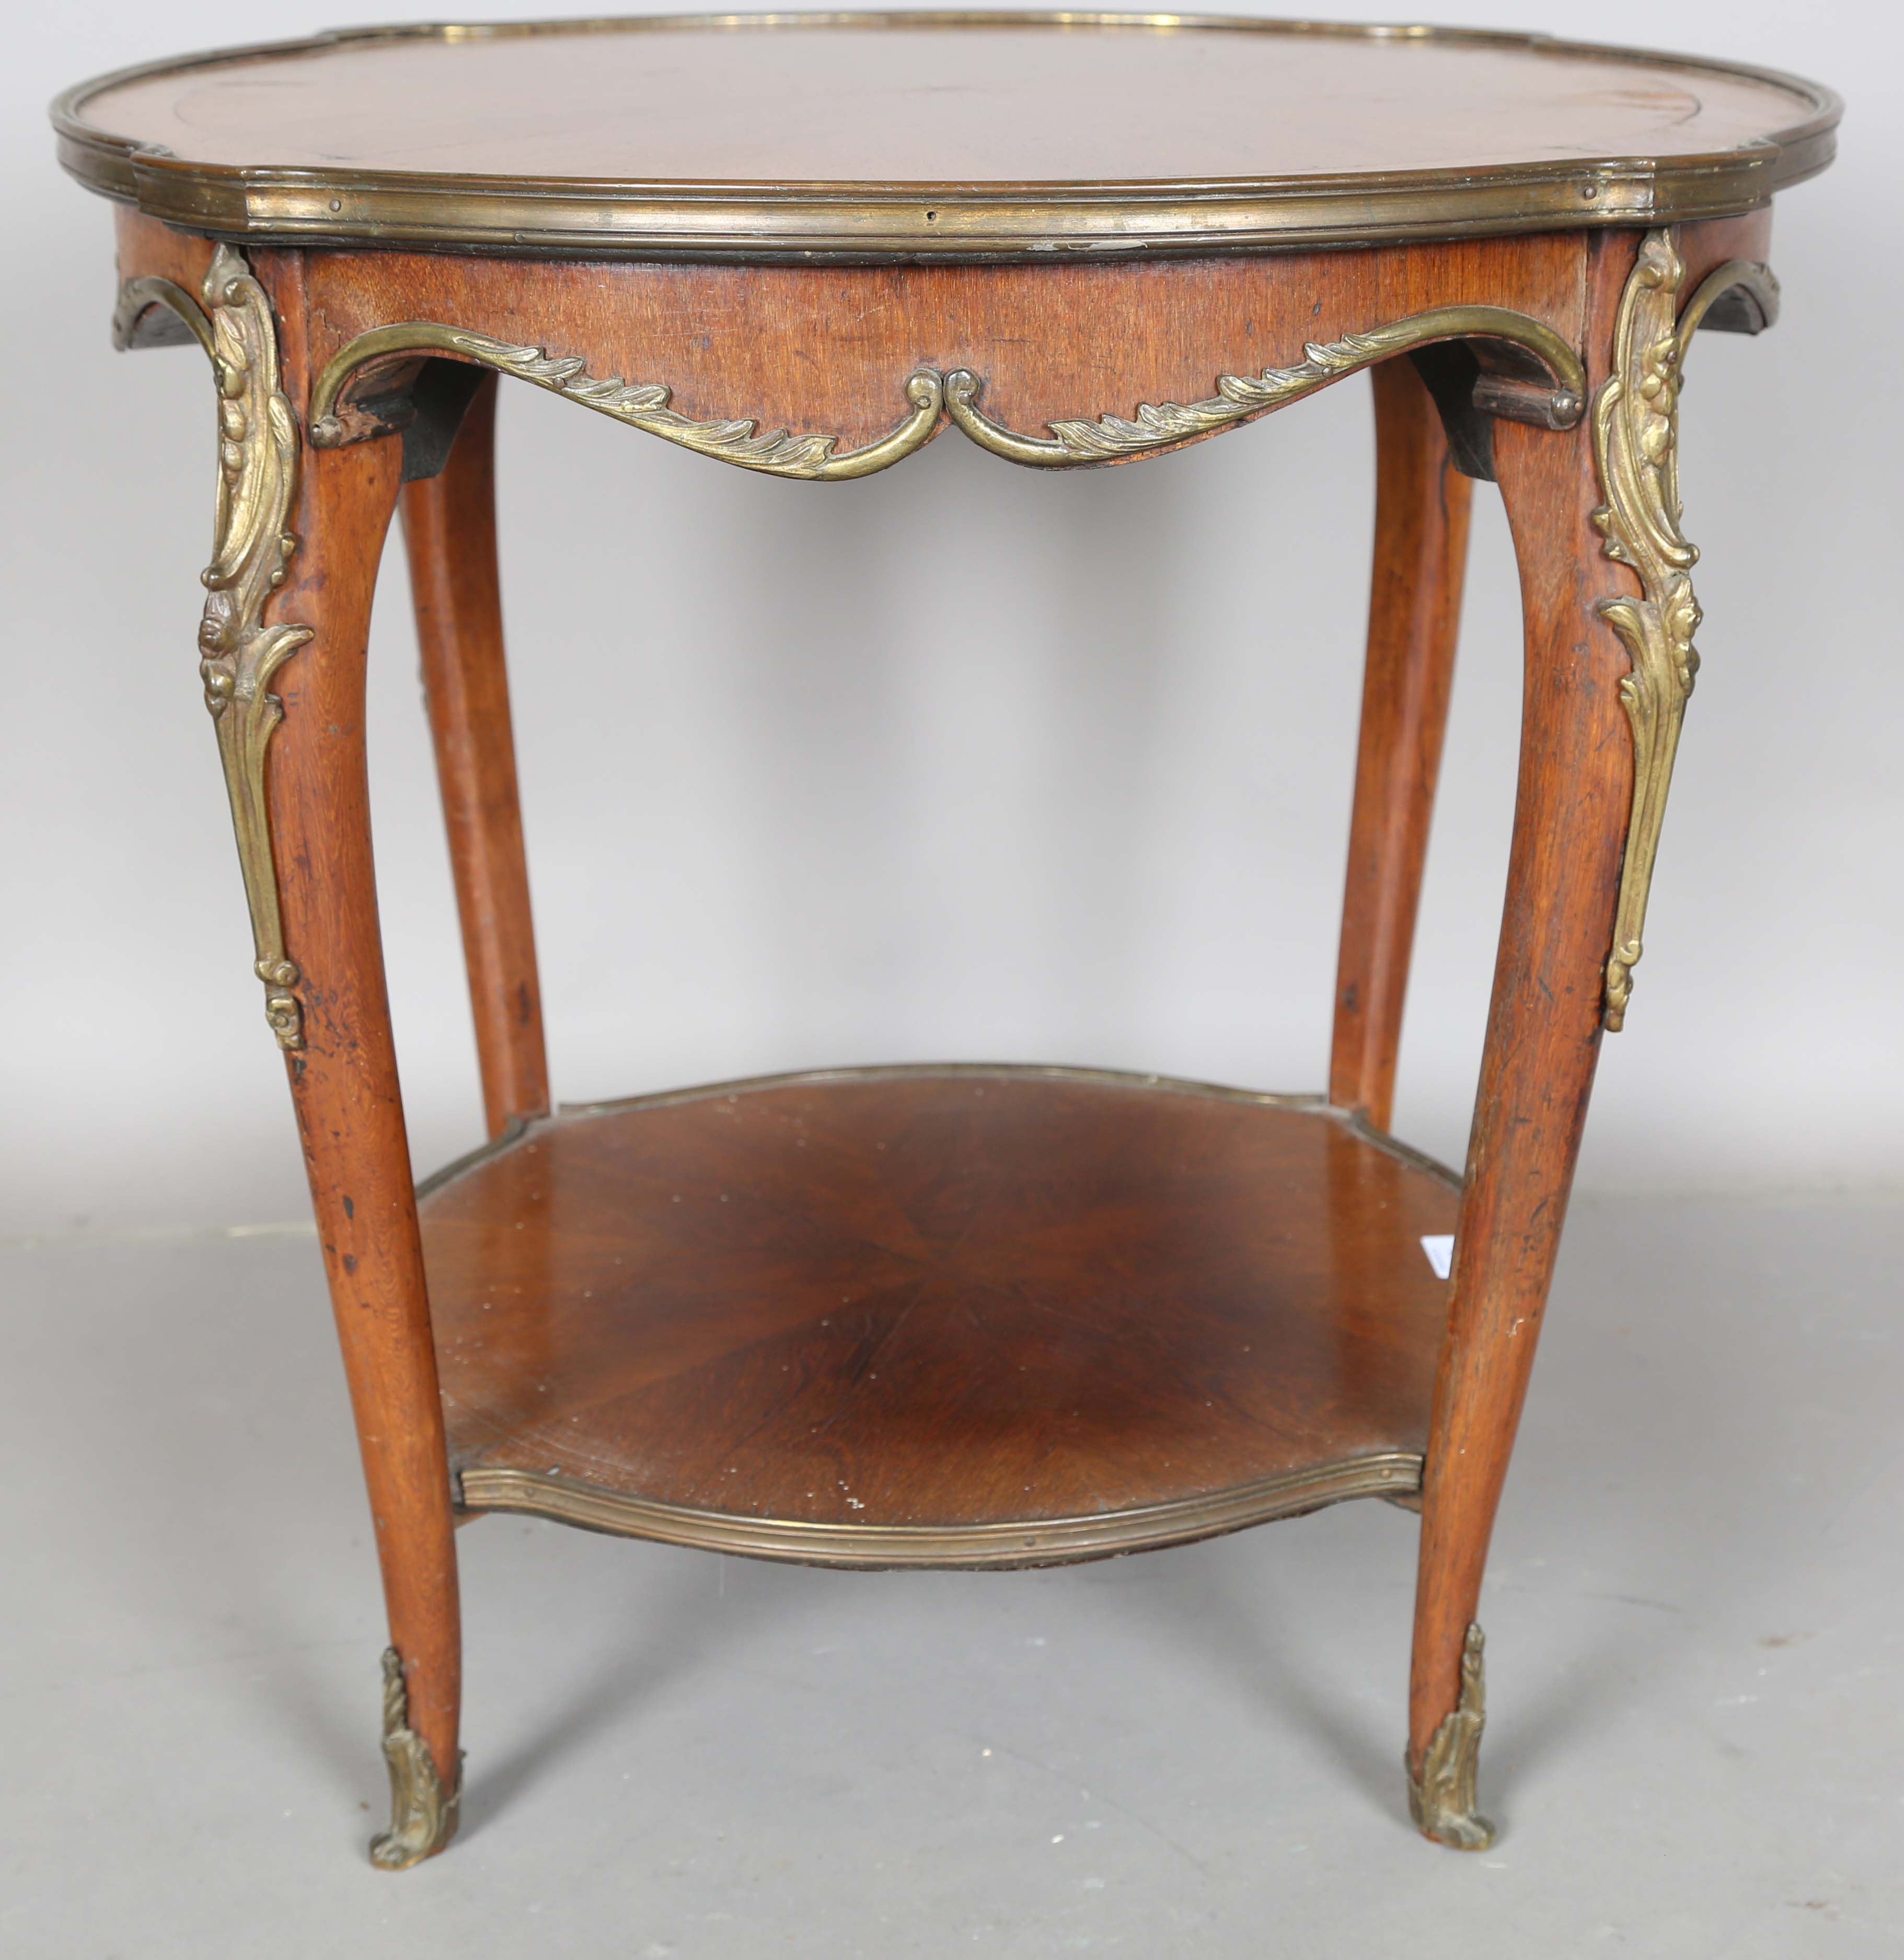 An early 20th century French walnut two-tier occasional table with radial veneers and gilt metal - Image 4 of 11